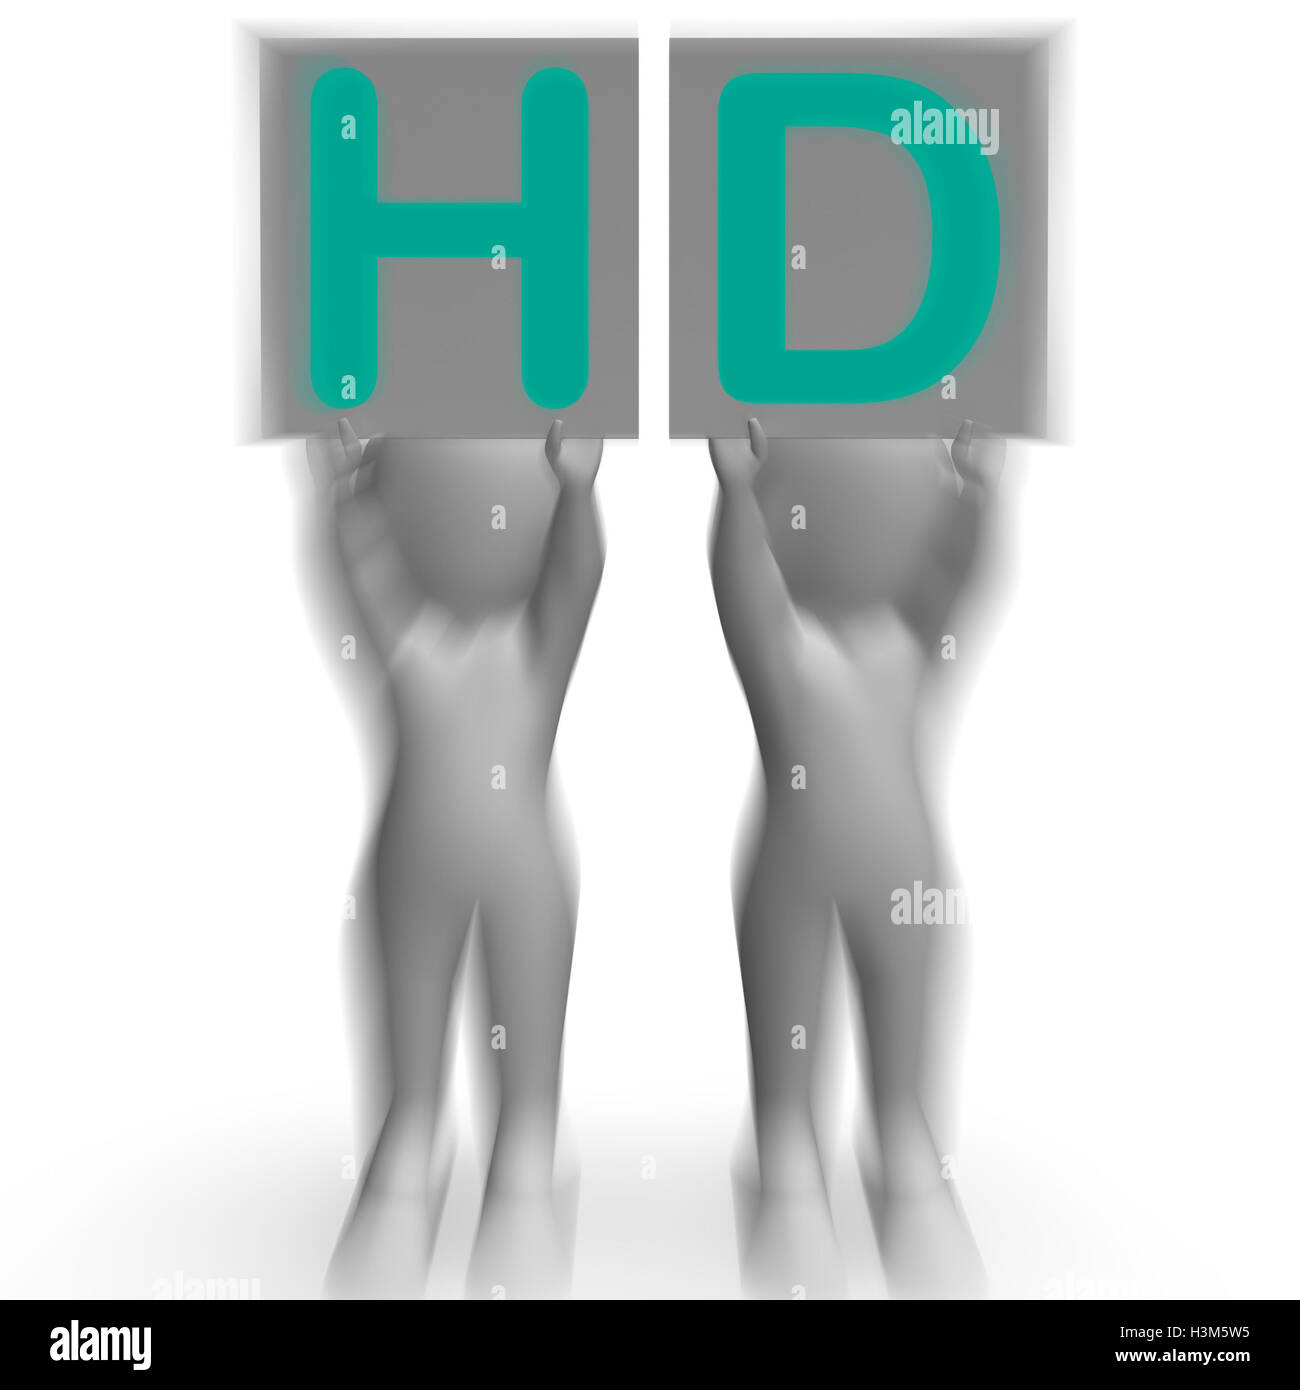 HD Placards Mean High Definition Television Or High Resolution Stock Photo